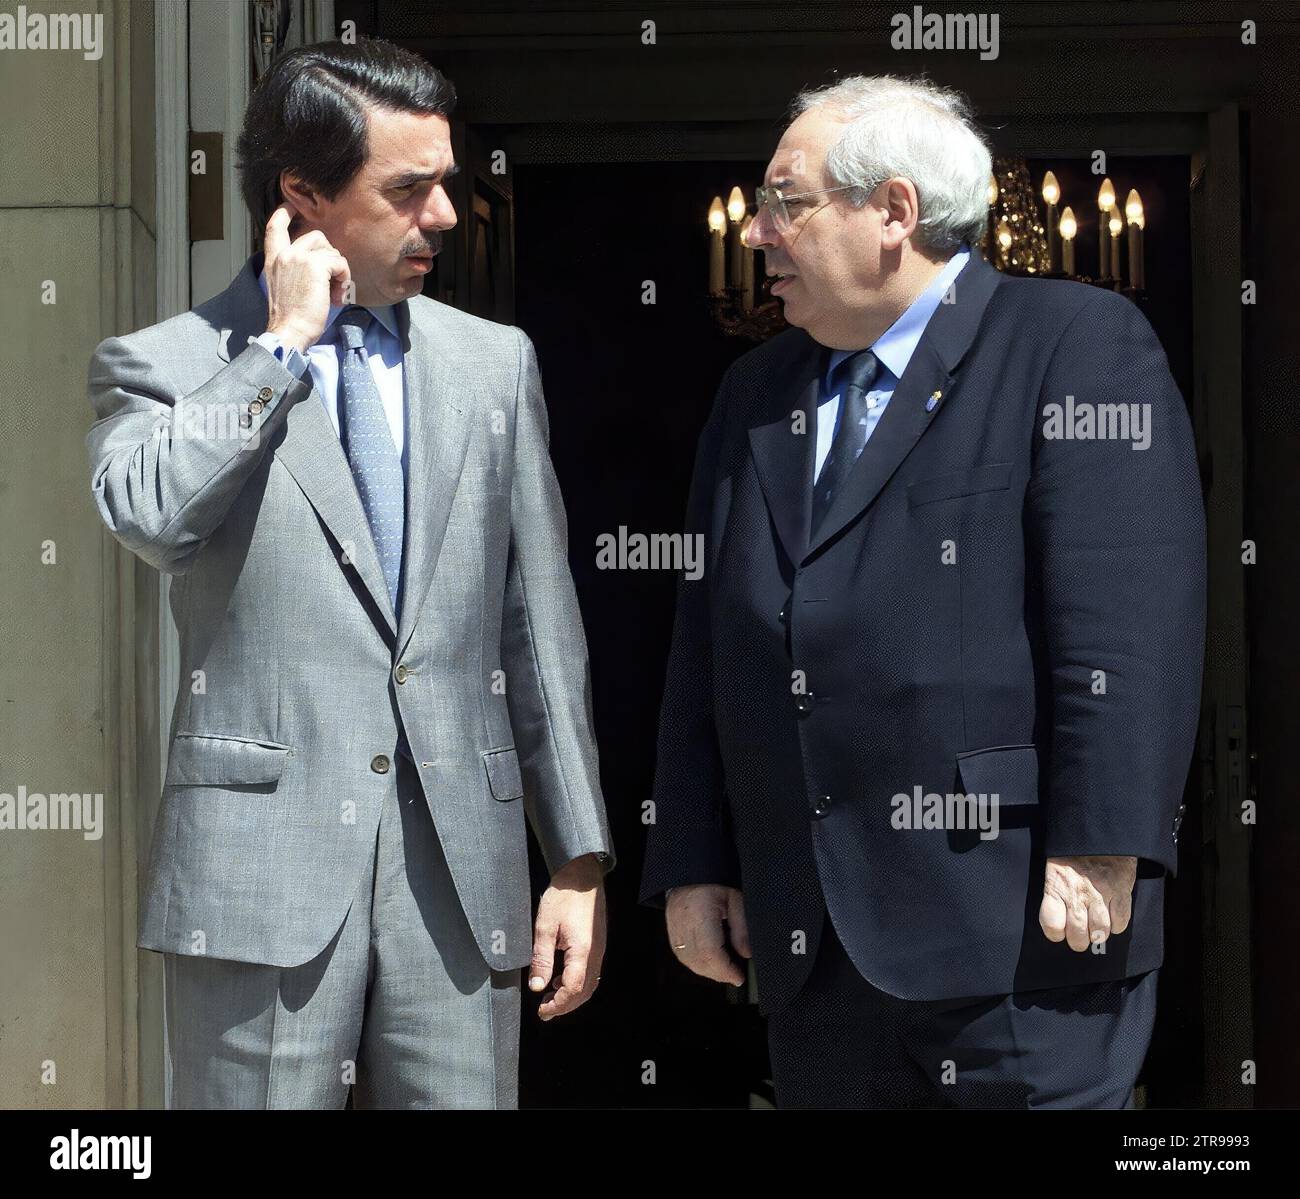 11/07/2000 Madrid Moncloa Palace. Interview. Of José María Aznar with the president of the principality of Asturias. Mr. Vicente Álvarez Areces. In the image. The two Presidents. Photo Chema Barroso-. Credit: Album / Archivo ABC / José María Barroso Stock Photo